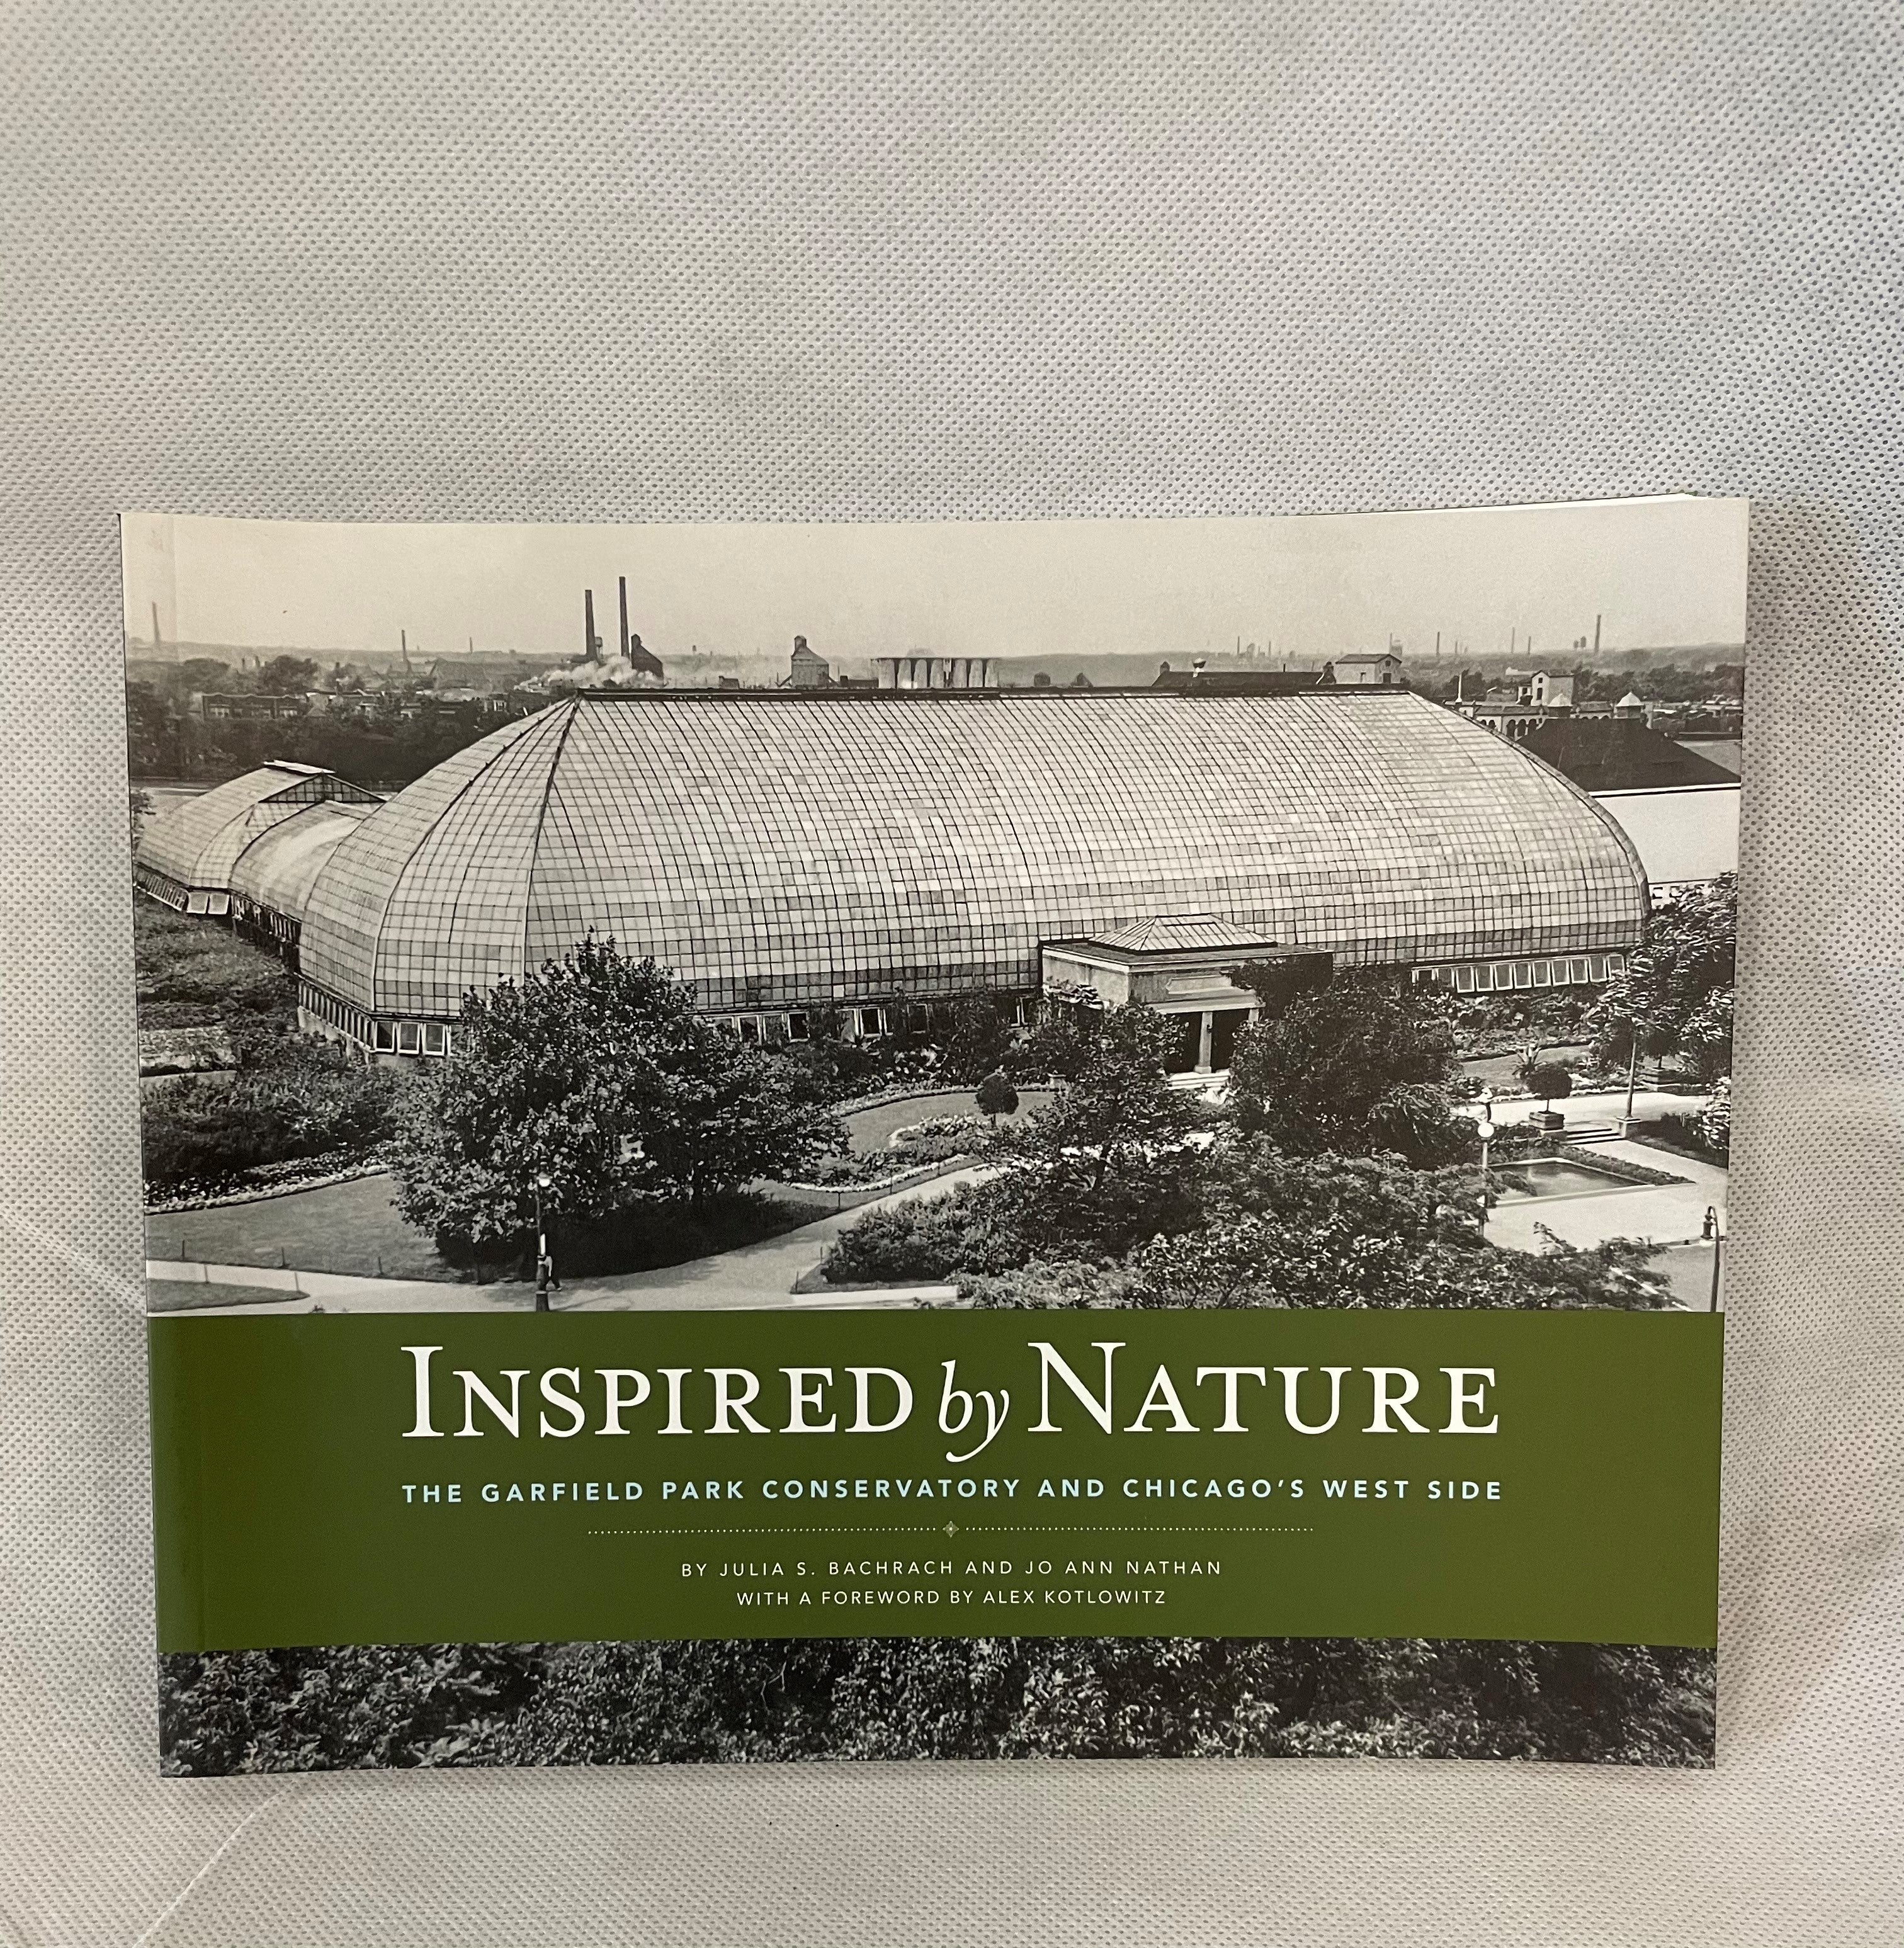 Inspired by Nature: The Garfield Park Conservatory and Chicago's West Side